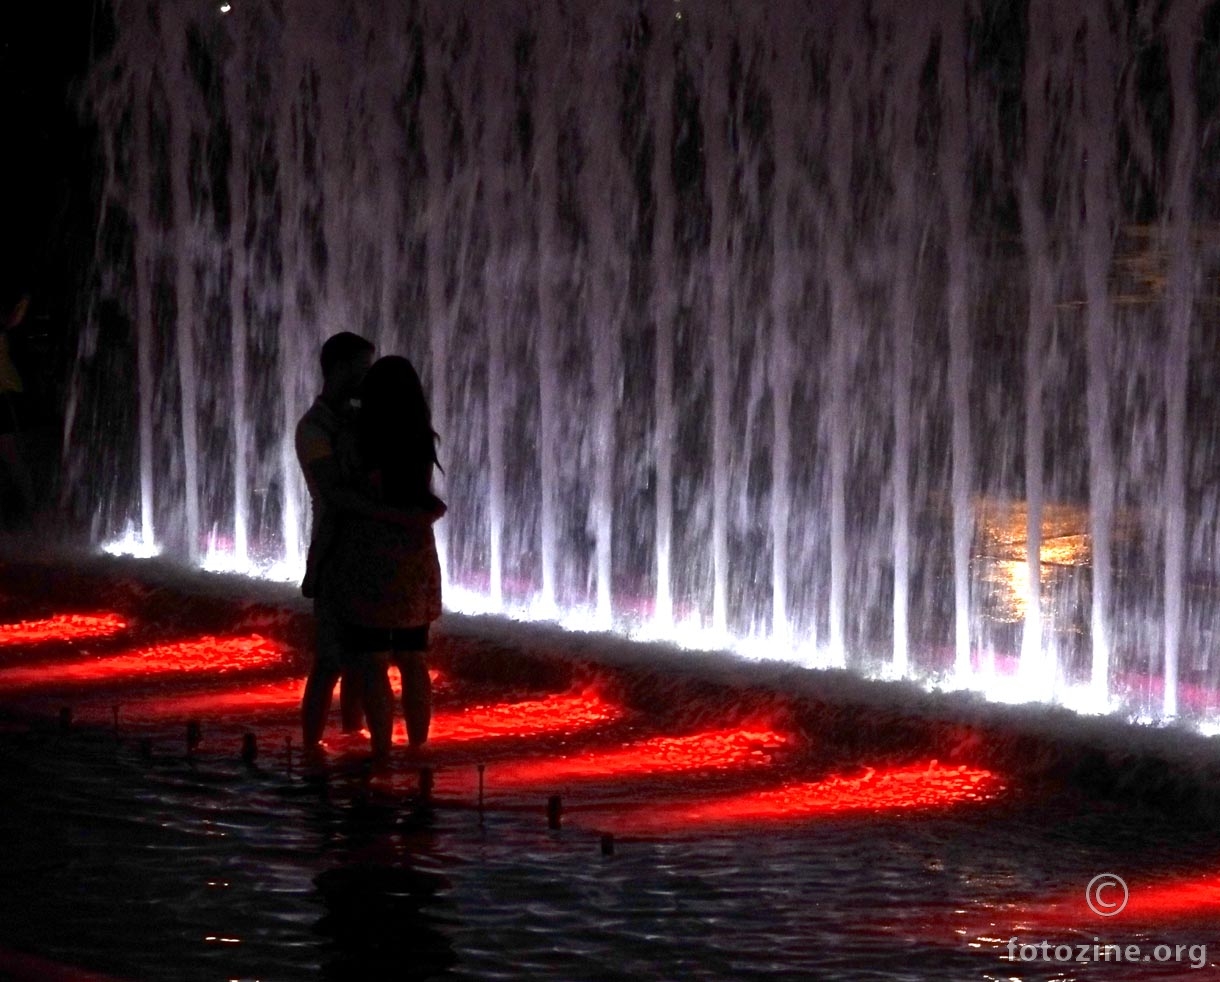 The fire of love in a cool water